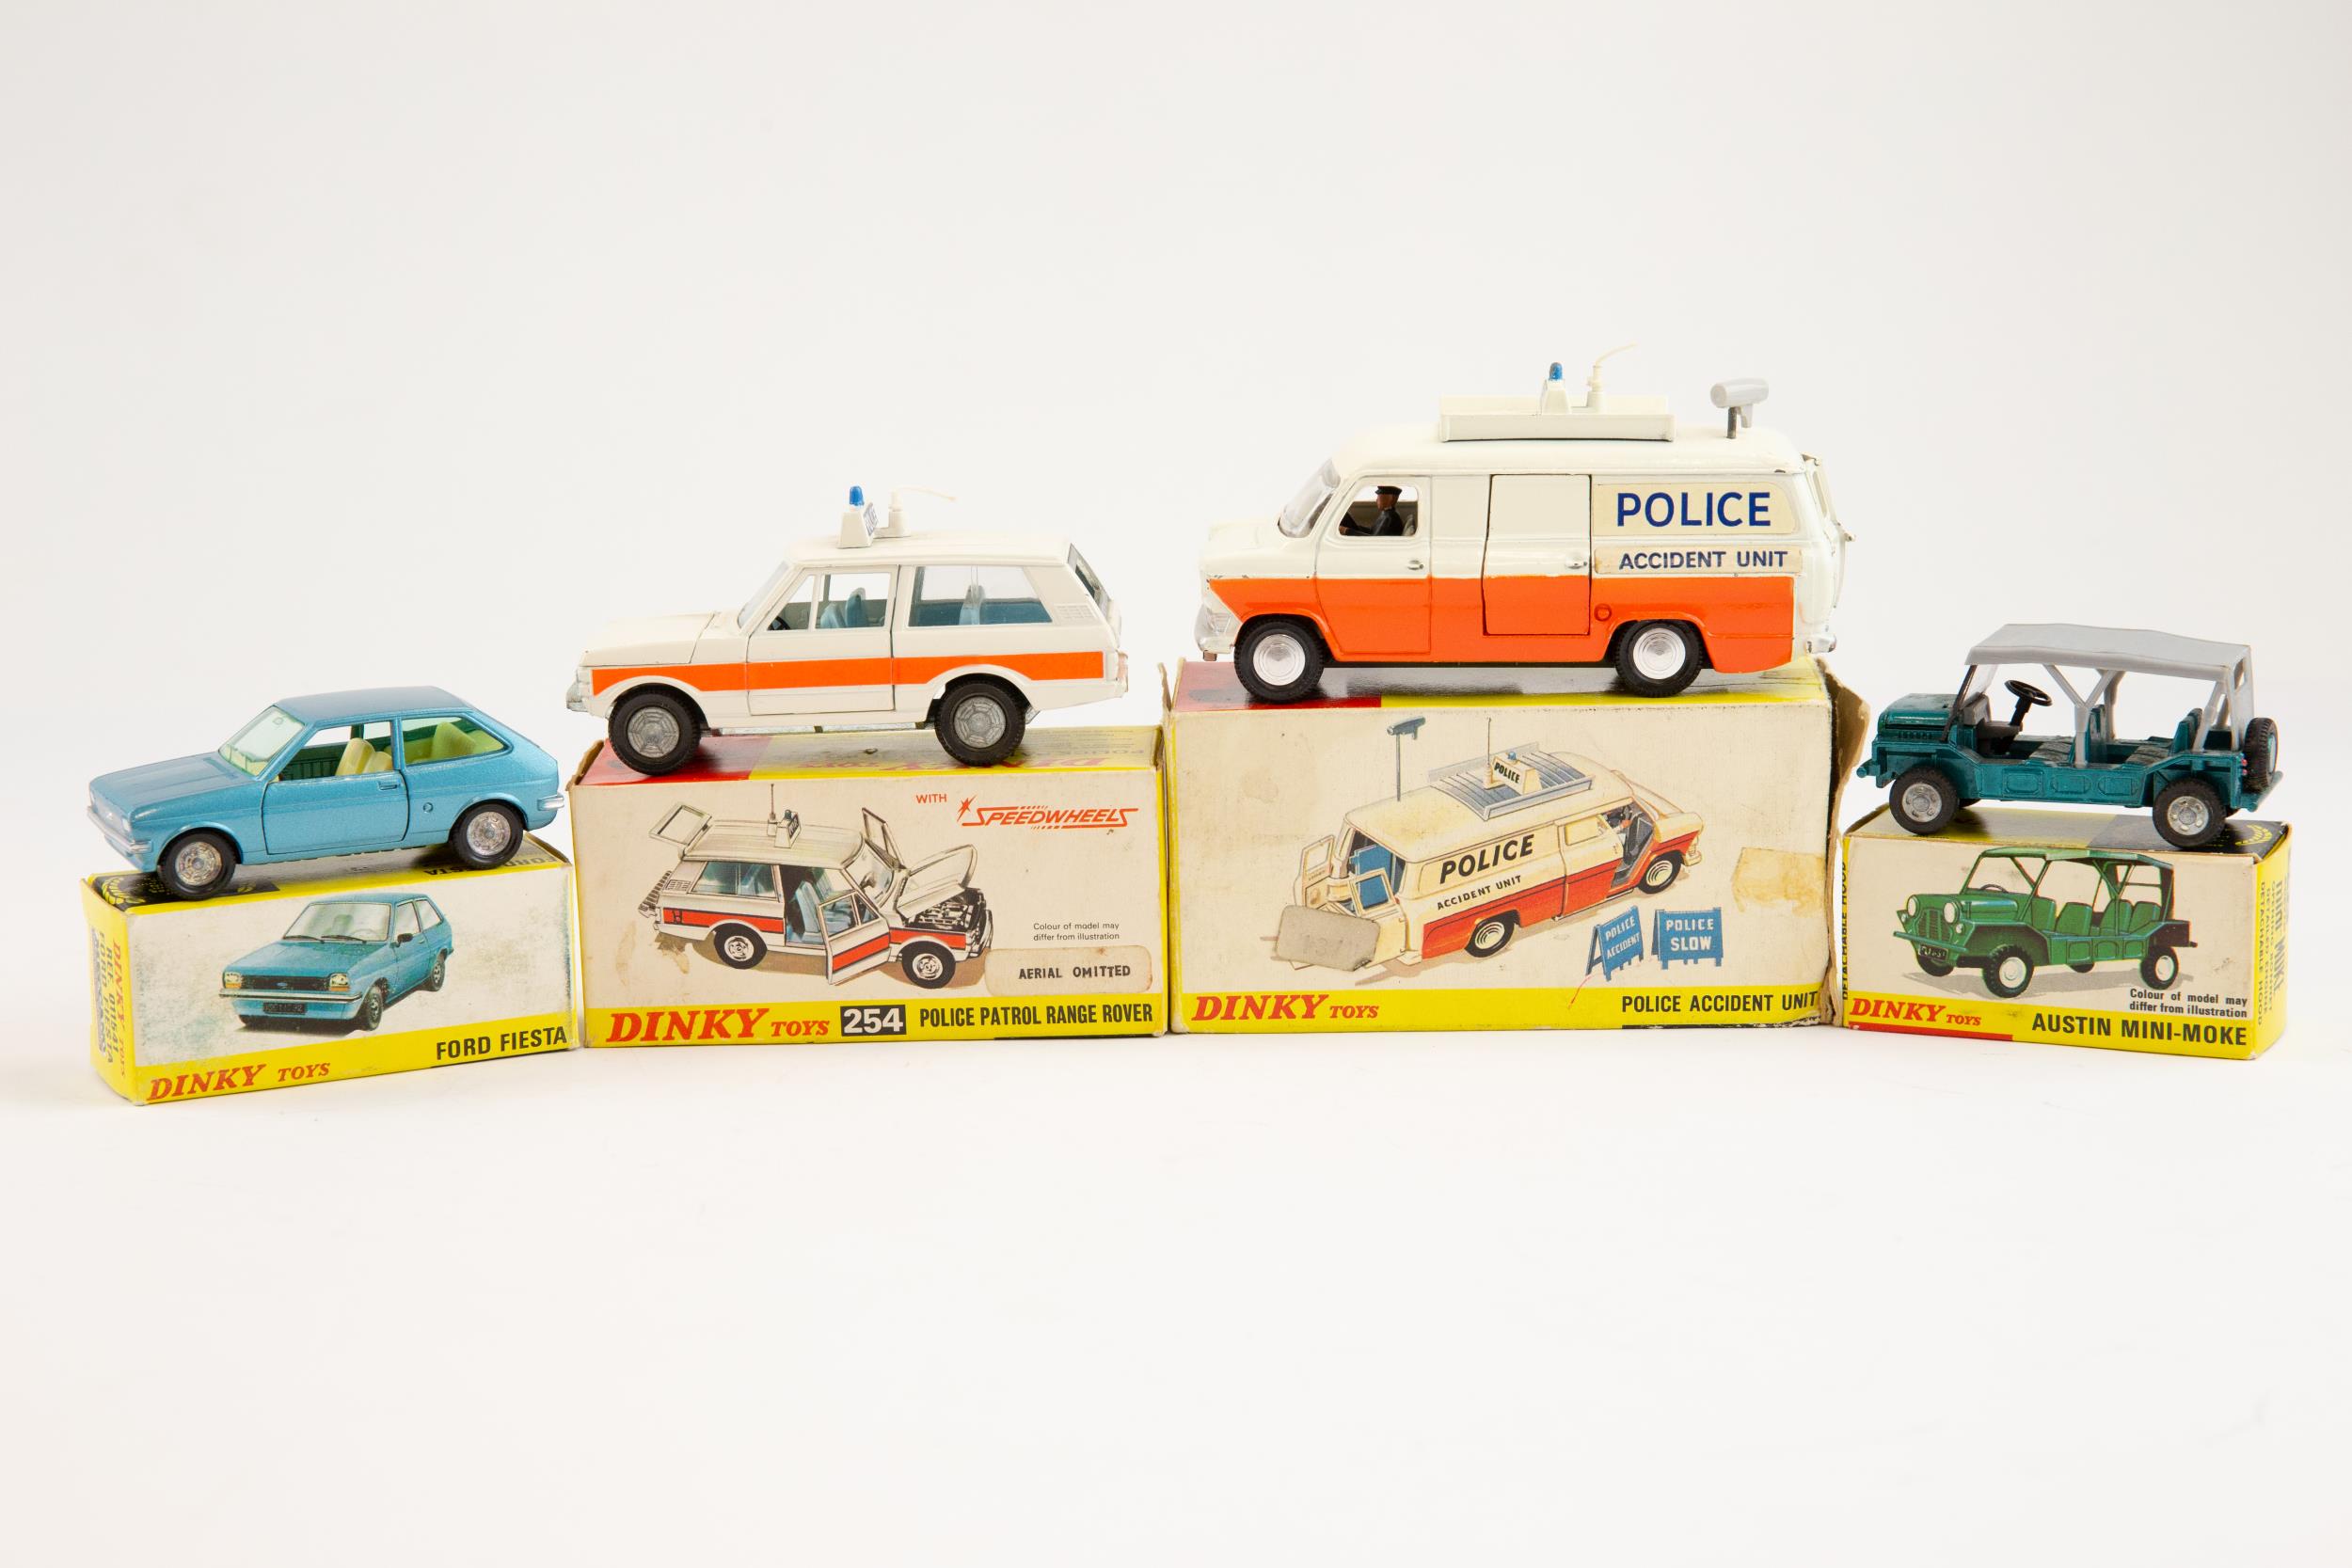 4 Dinky Toys. POLICE Patrol Range Rover (254). In white with paper orange flashes, light blue